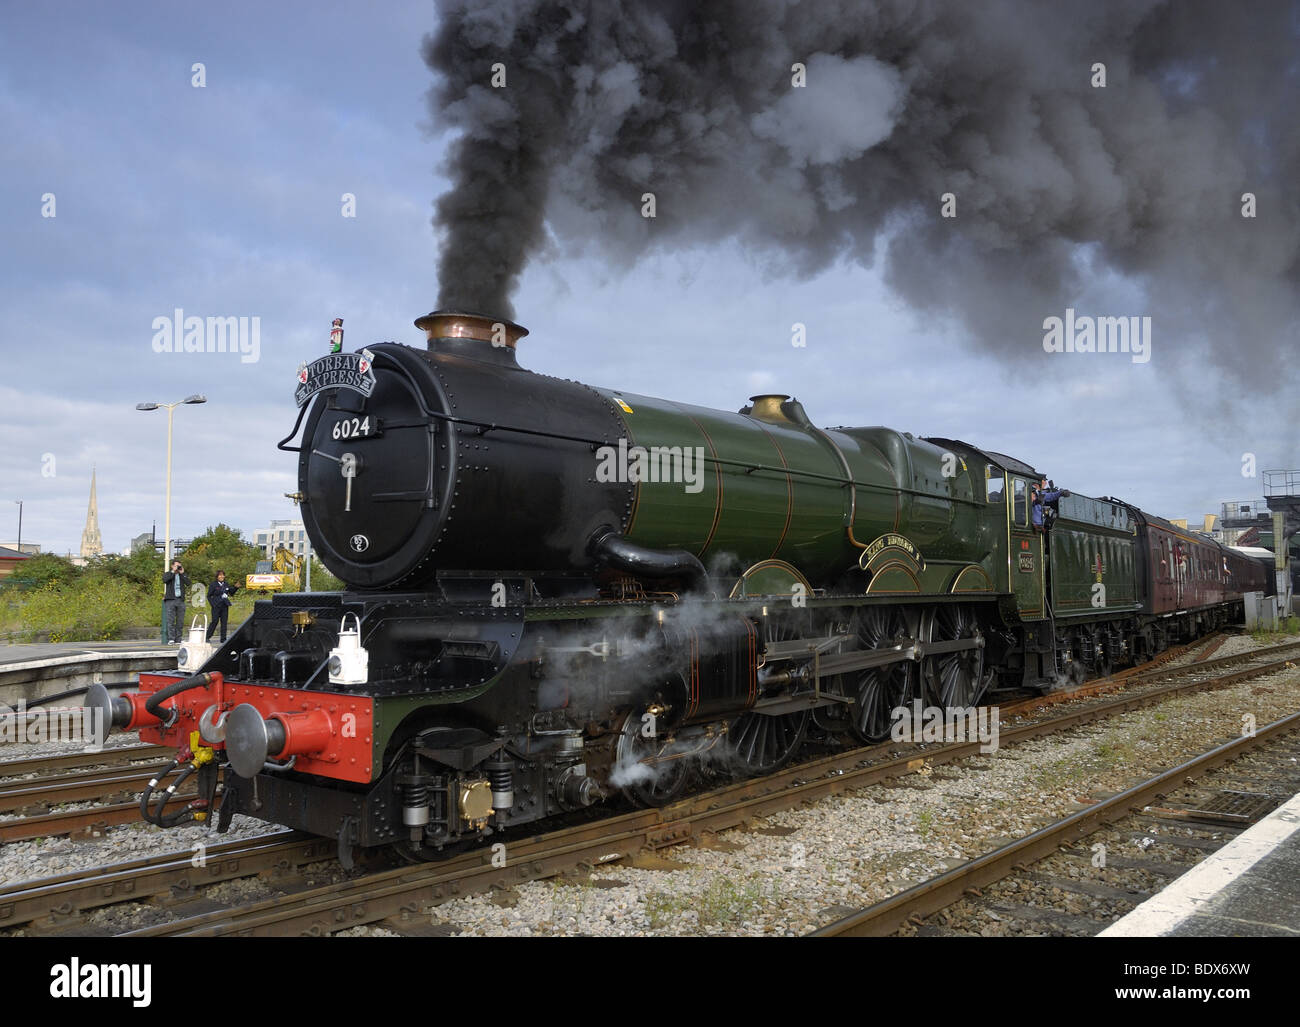 King Edward I, number 6024 leaving Bristol temple Meads railway station Hauling the summer special train 'the Torbay Express' Stock Photo